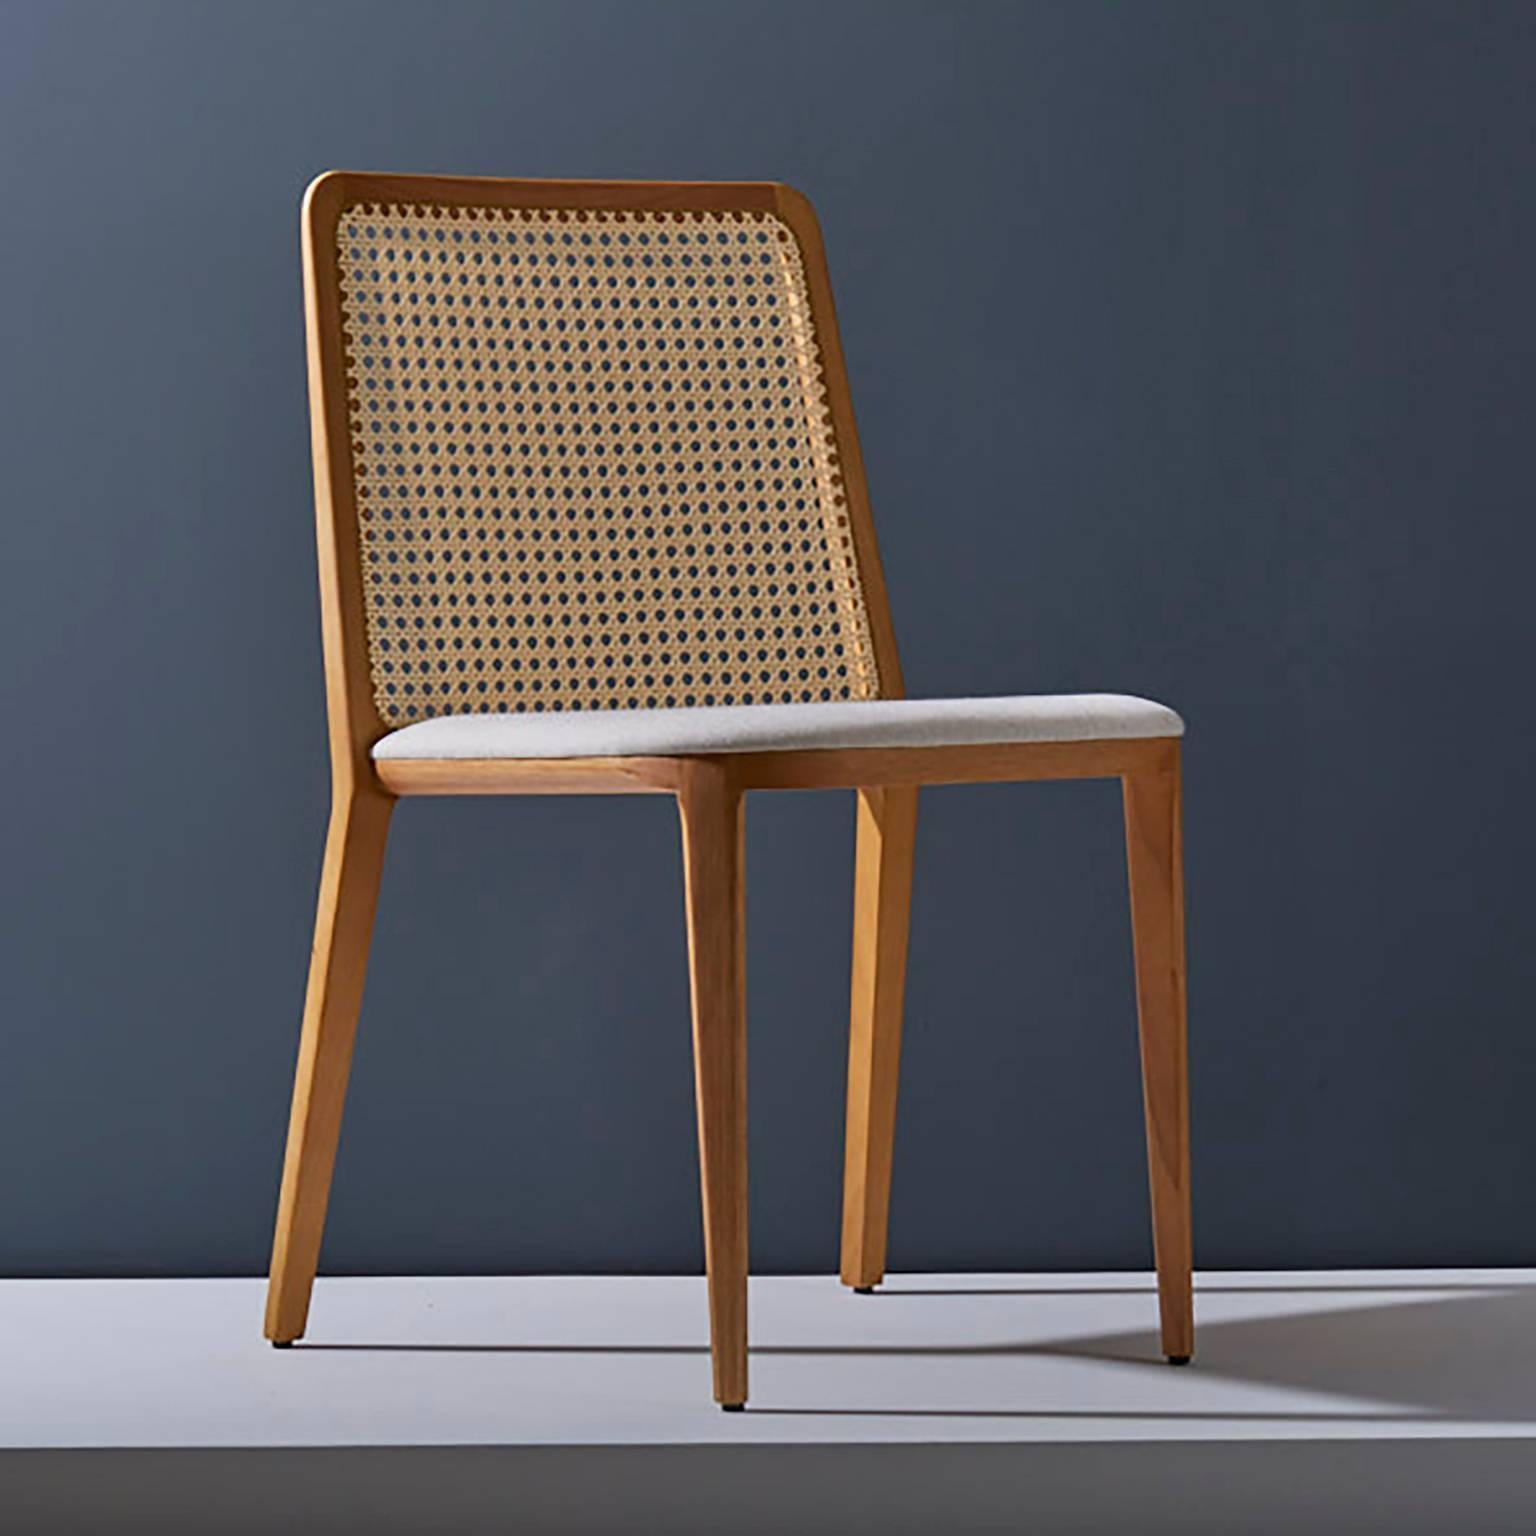 Minimal Style, Solid Wood Chair, Leather or Textile Seating, Caning Backboard For Sale 2